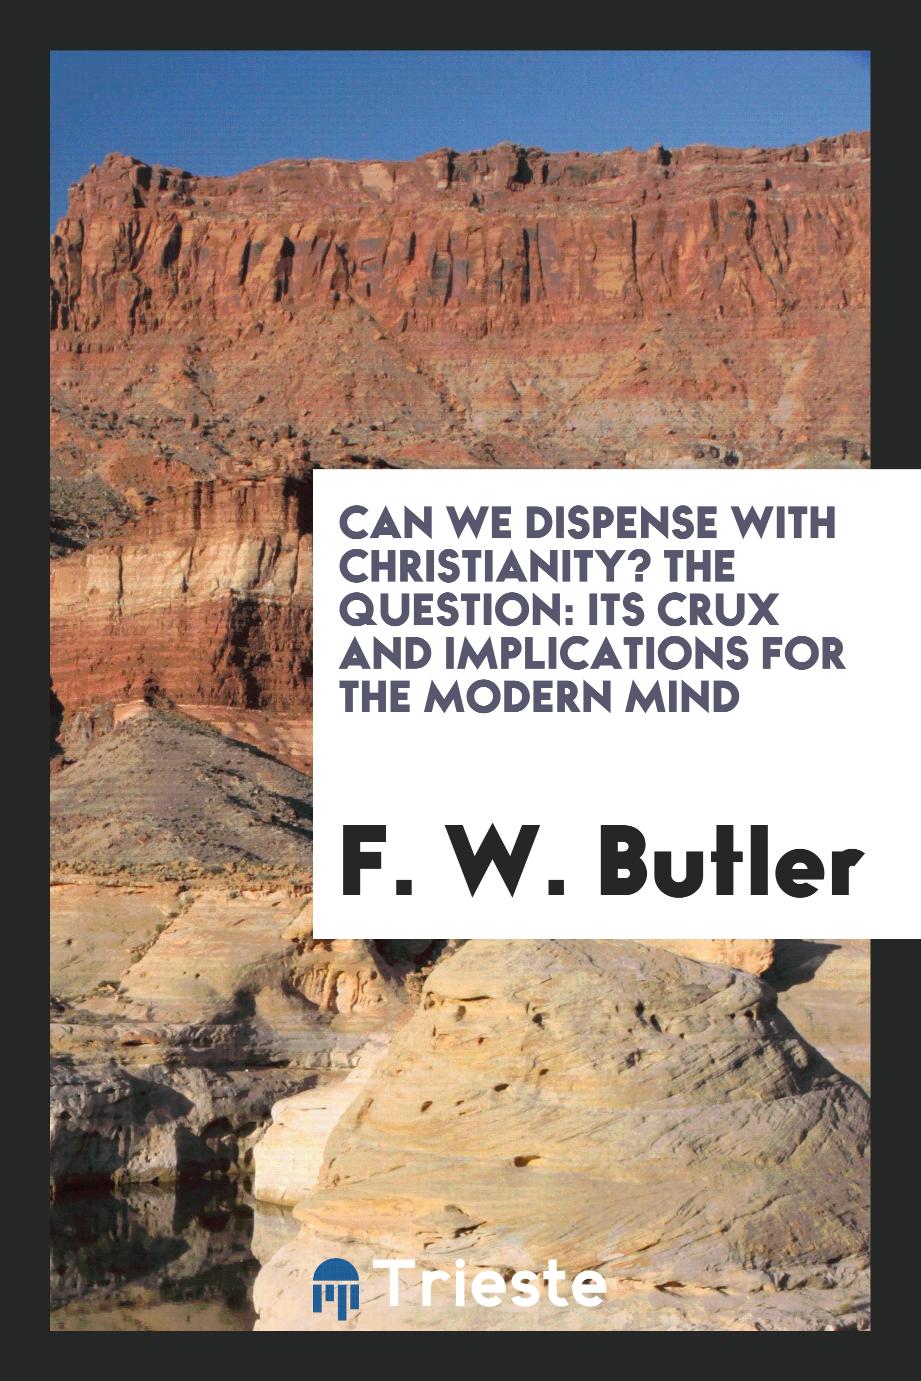 F. W. Butler - Can we dispense with Christianity? The question: its crux and implications for the modern mind